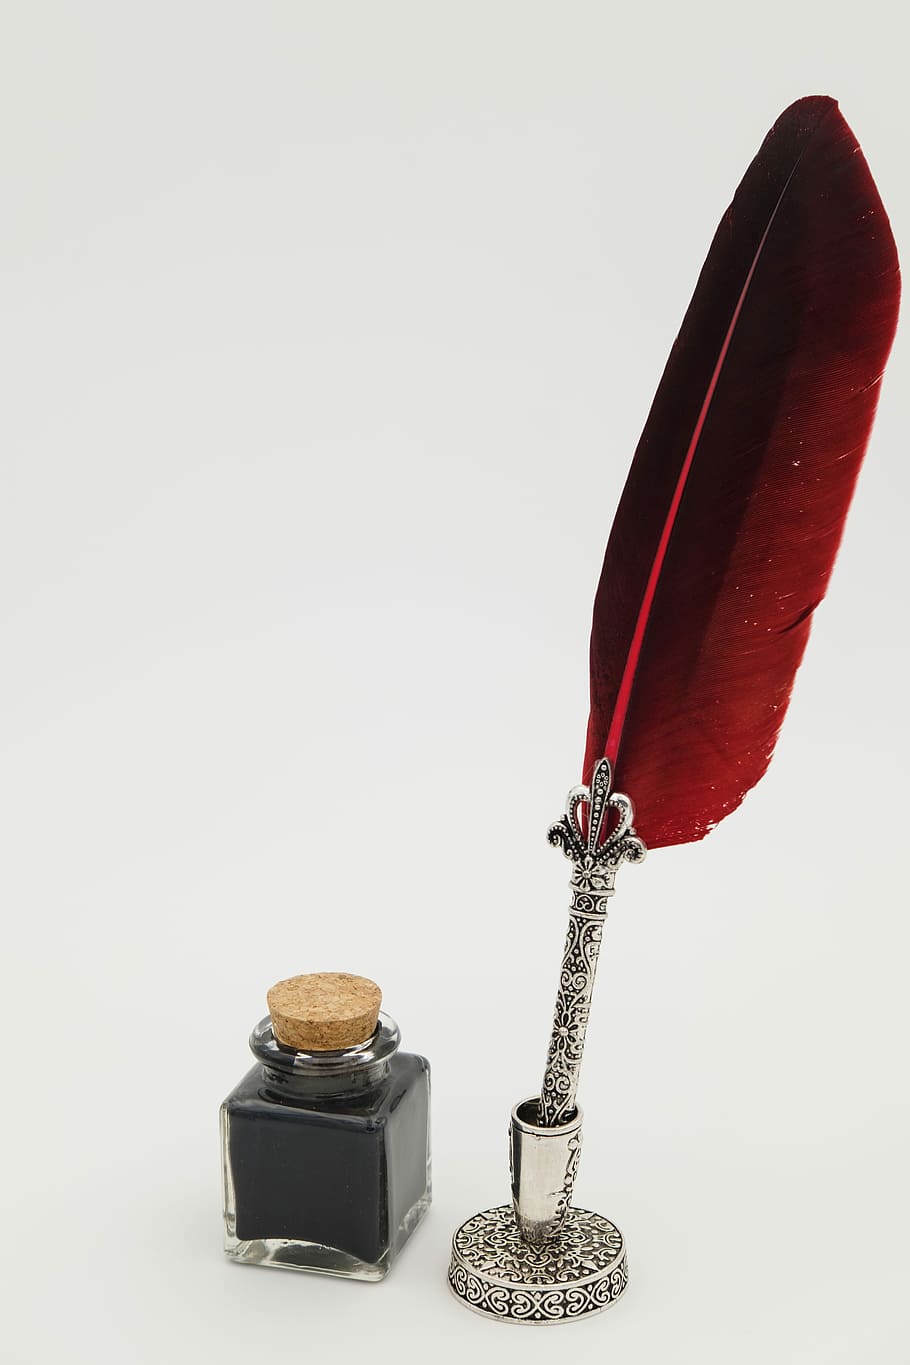 gray, red, fountain pen, feather, ink bottle, leave, communicate, communication, pen, writing implement